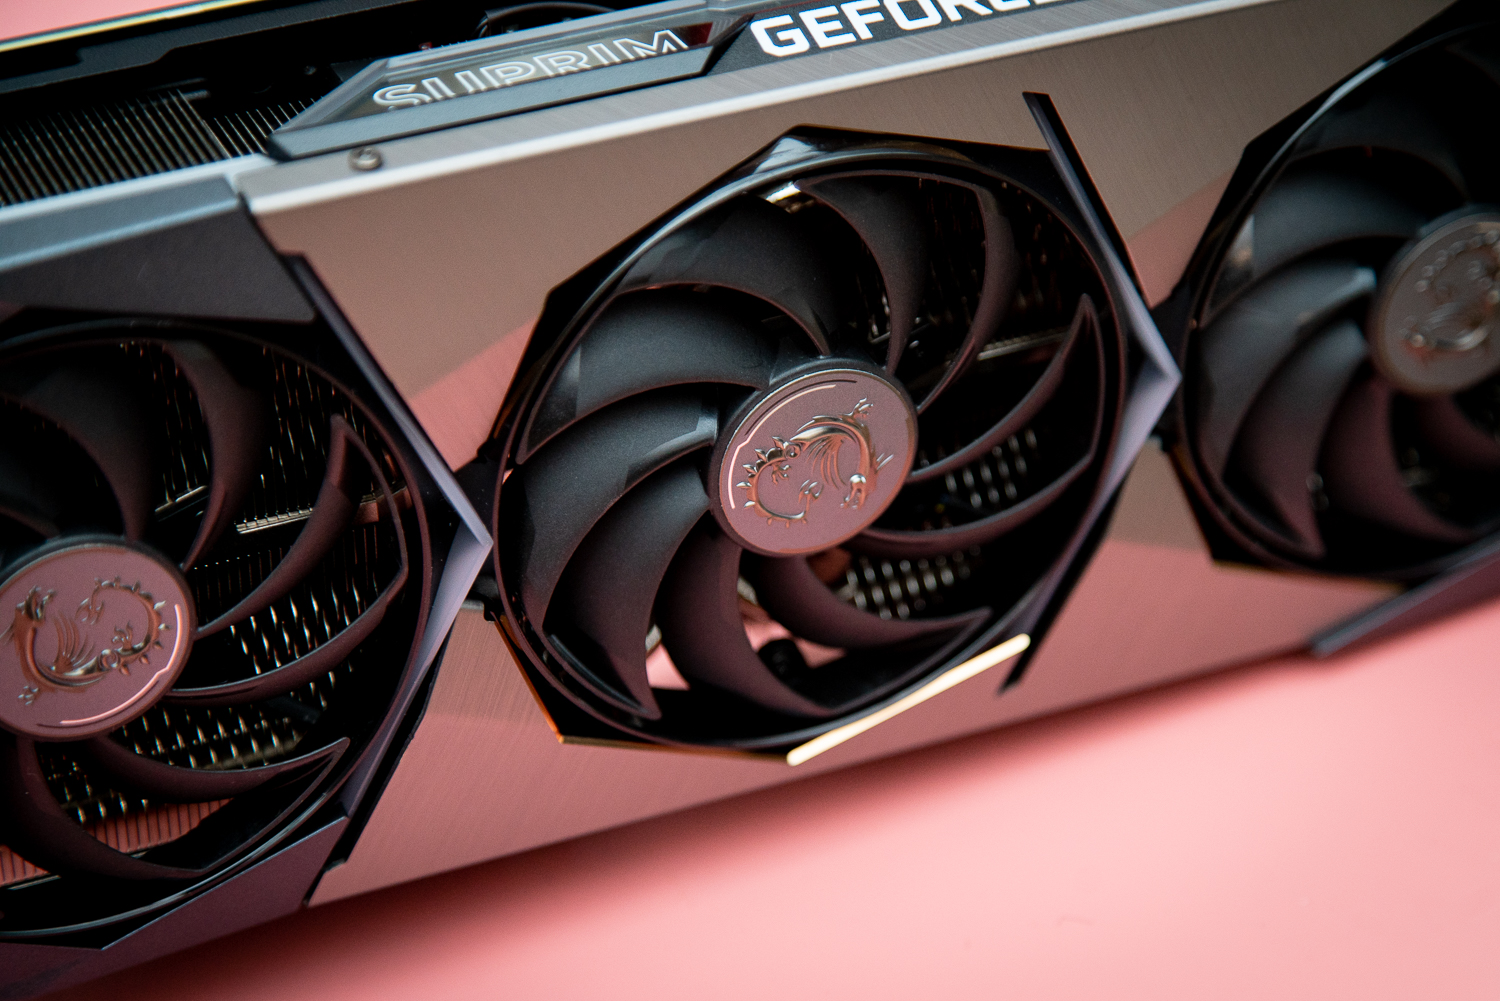 The 5 worst Nvidia GPUs of all time